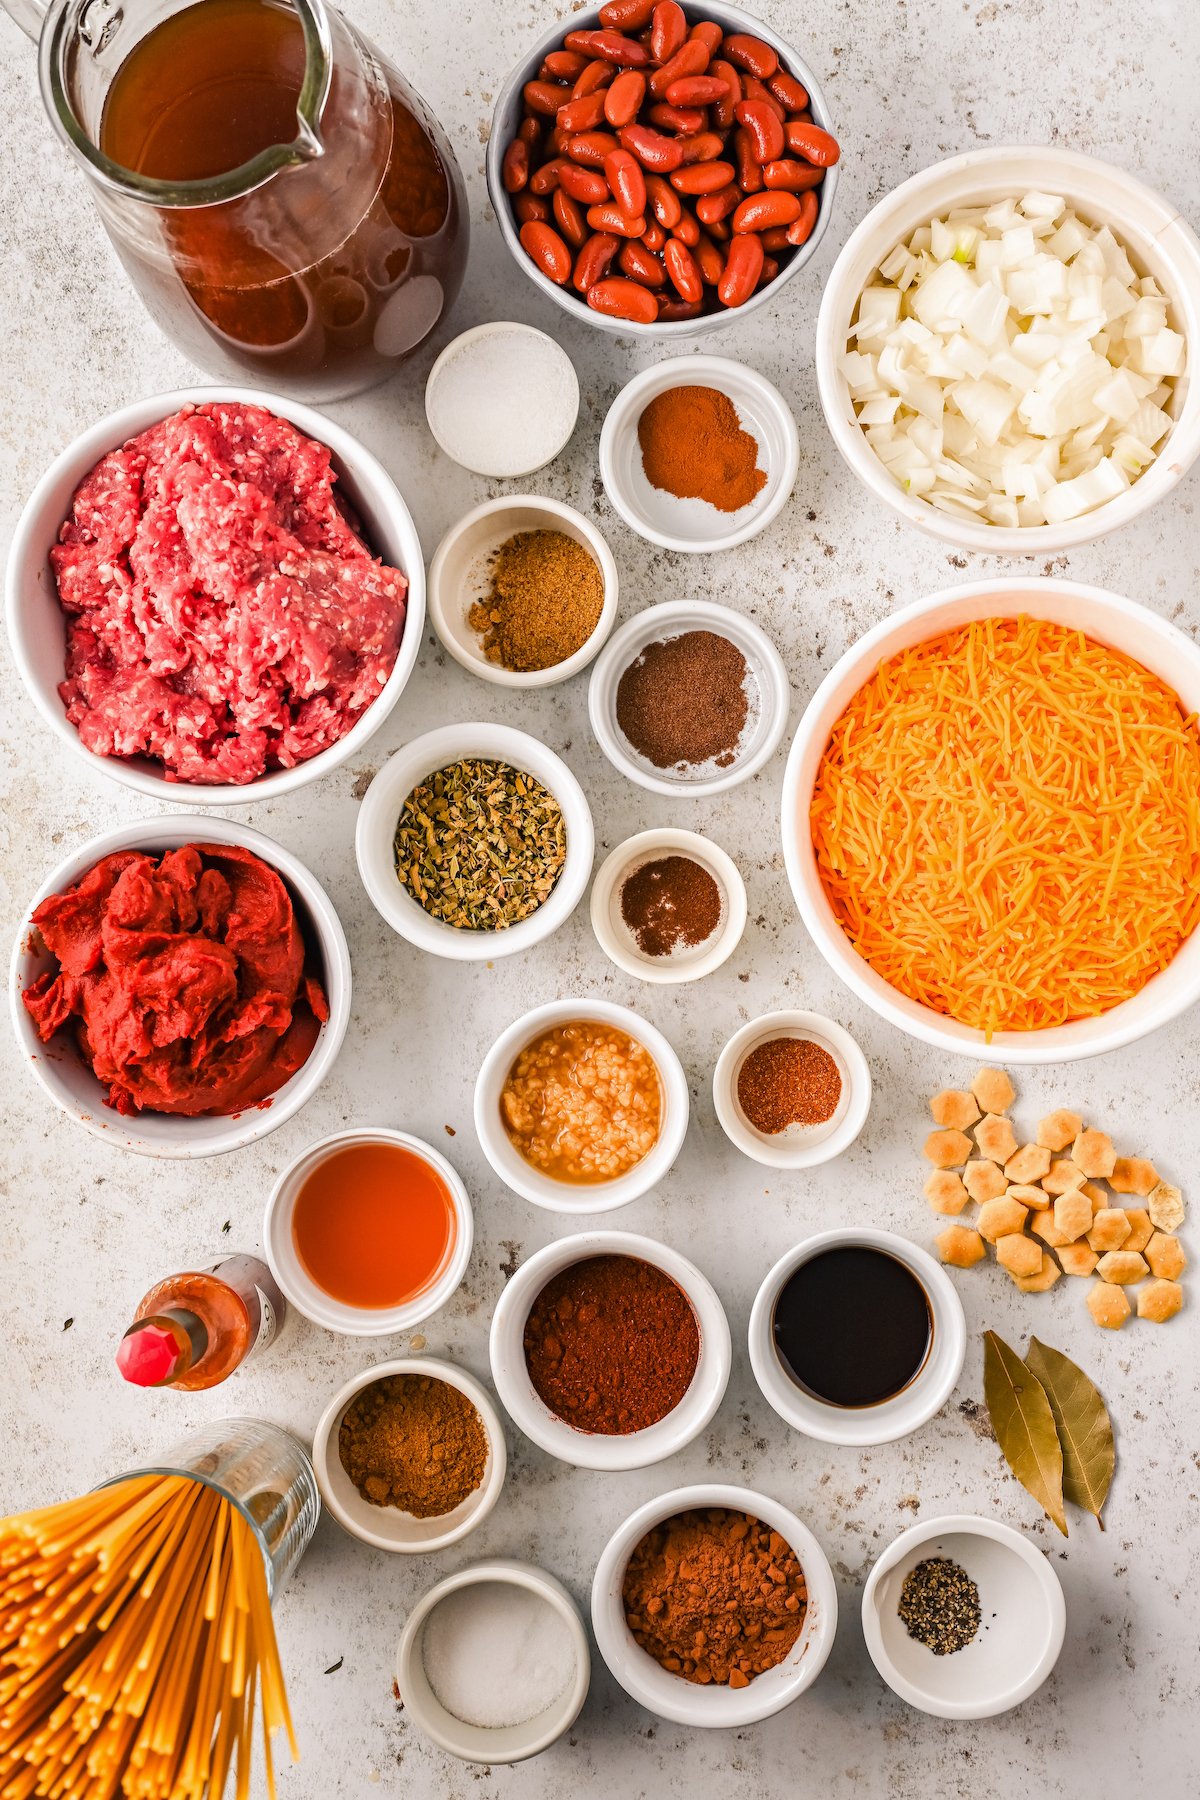 Ingredients for homemade cincinnati chili, arranged on a work surface.